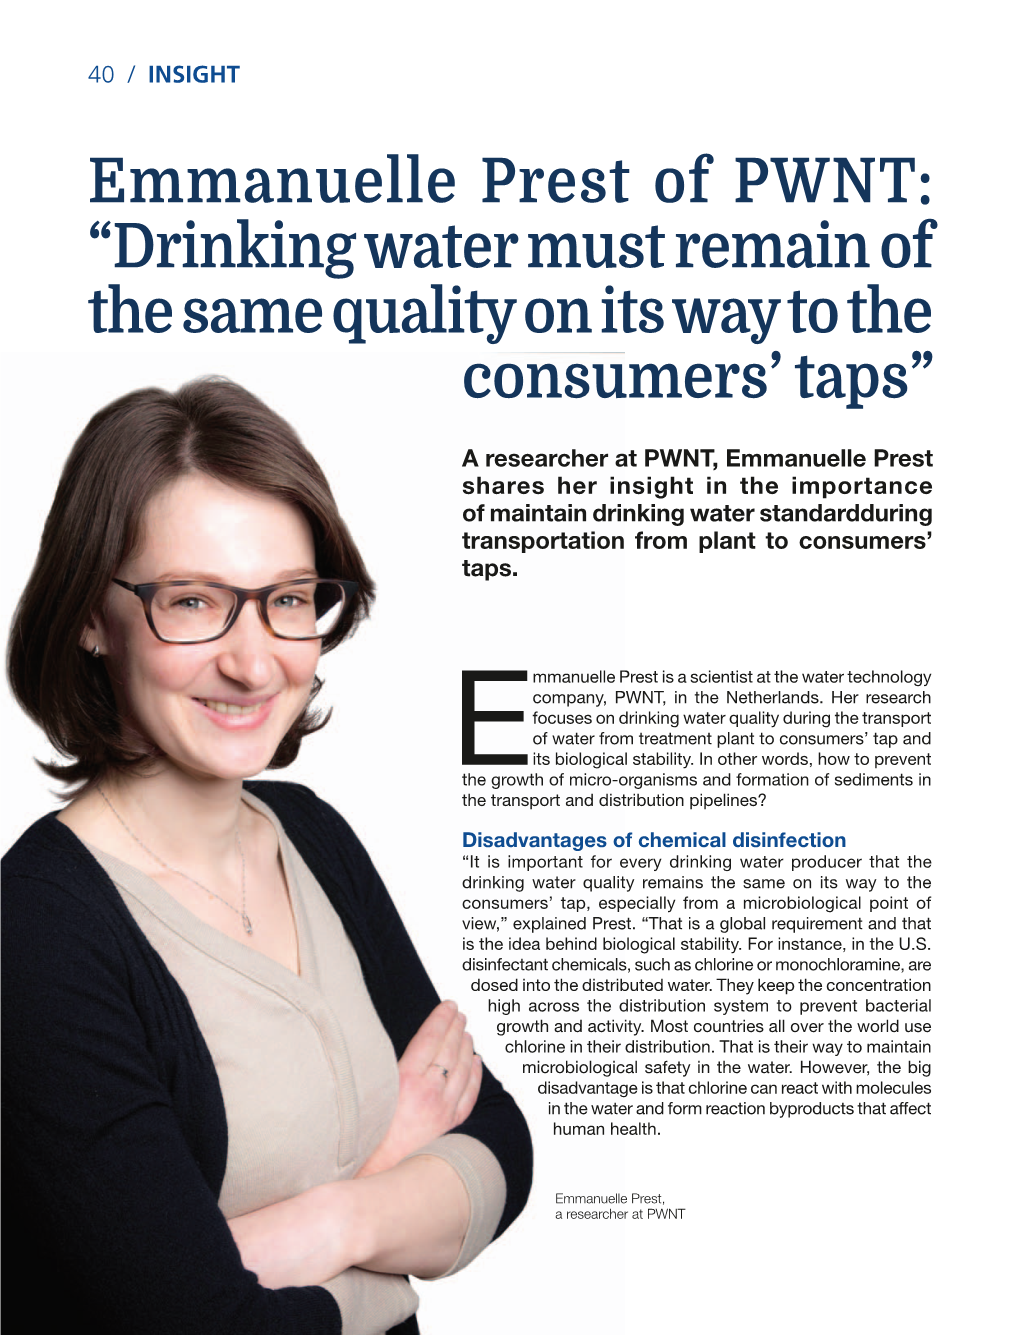 Emmanuelle Prest of PWNT: “Drinking Water Must Remain of the Same Quality on Its Way to the Consumers’ Taps”